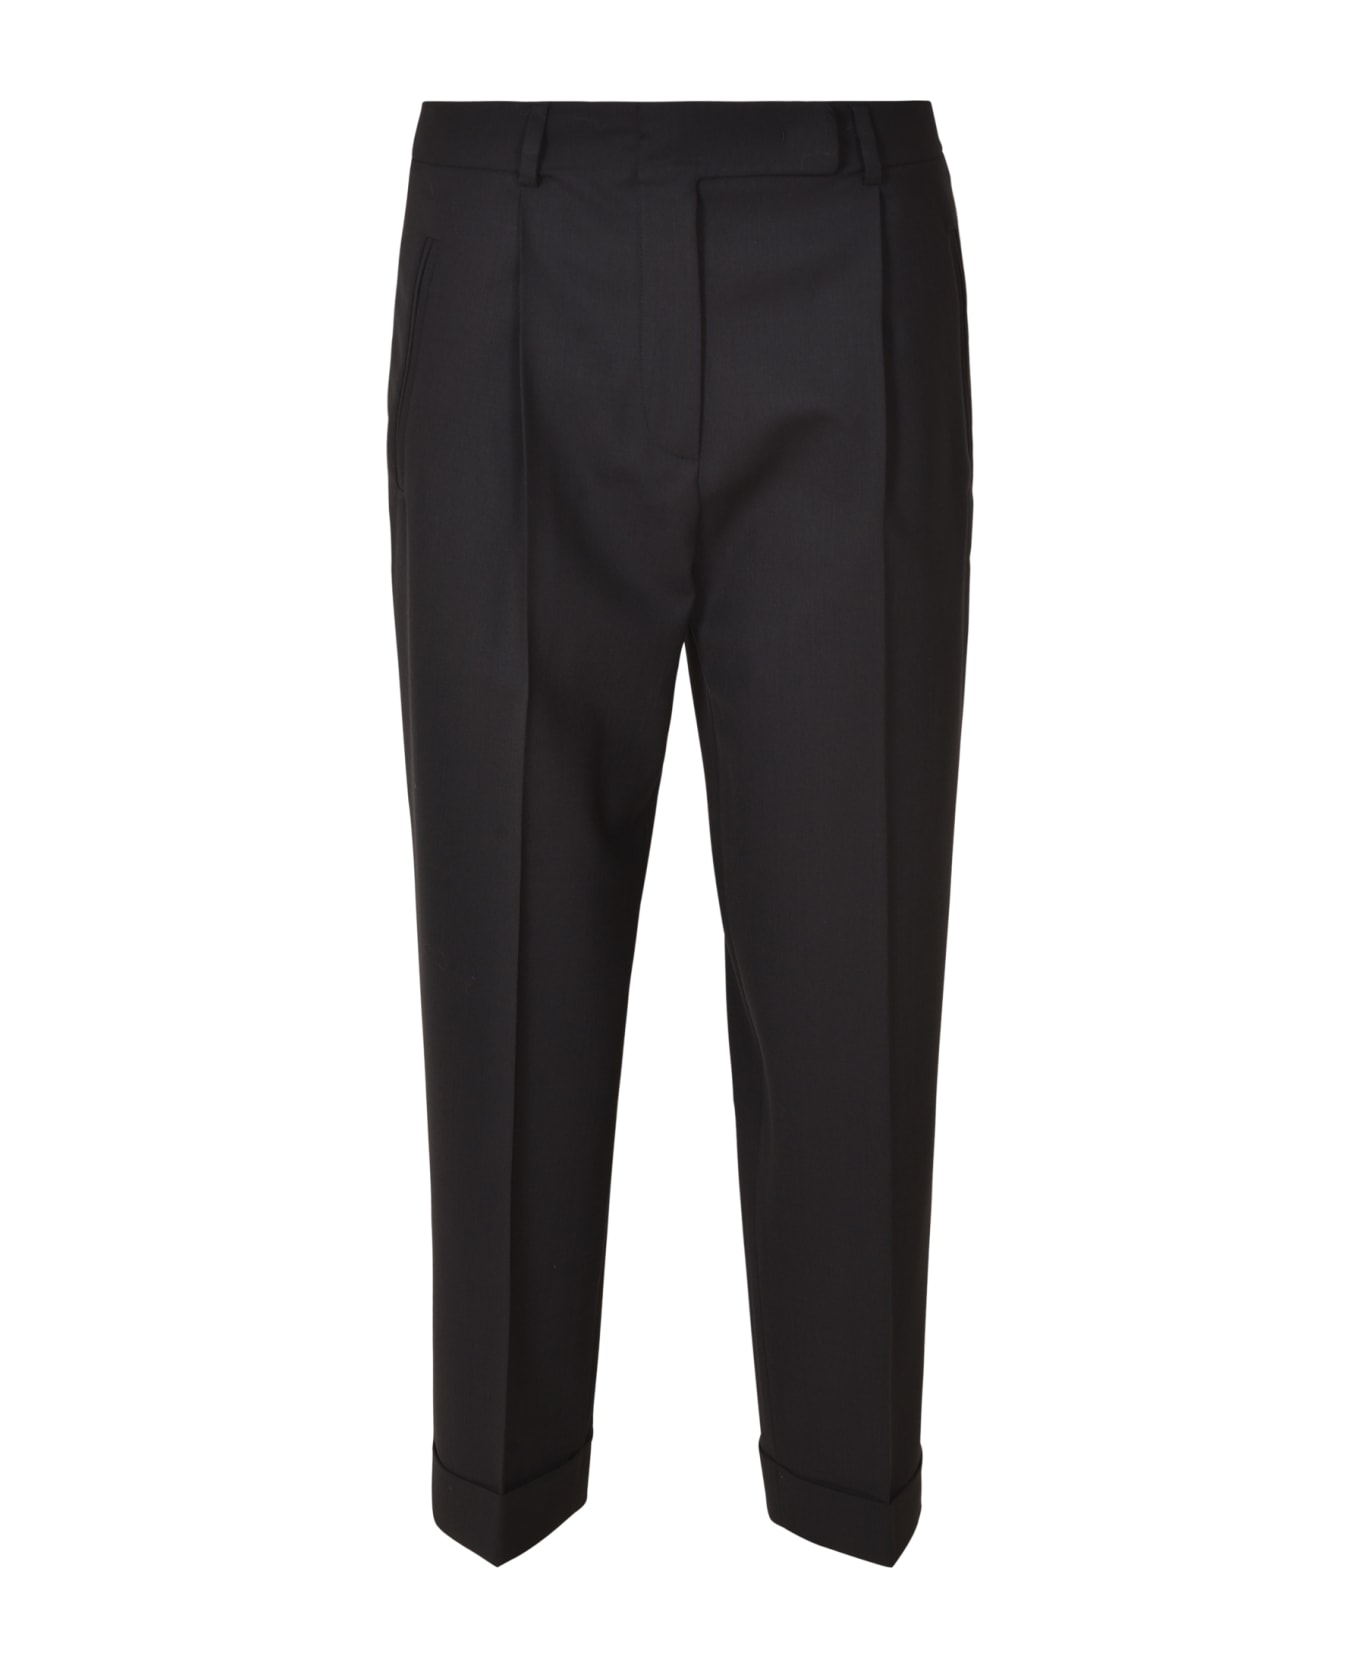 QL2 Wrap Fitted Trousers strap-detail - Navy